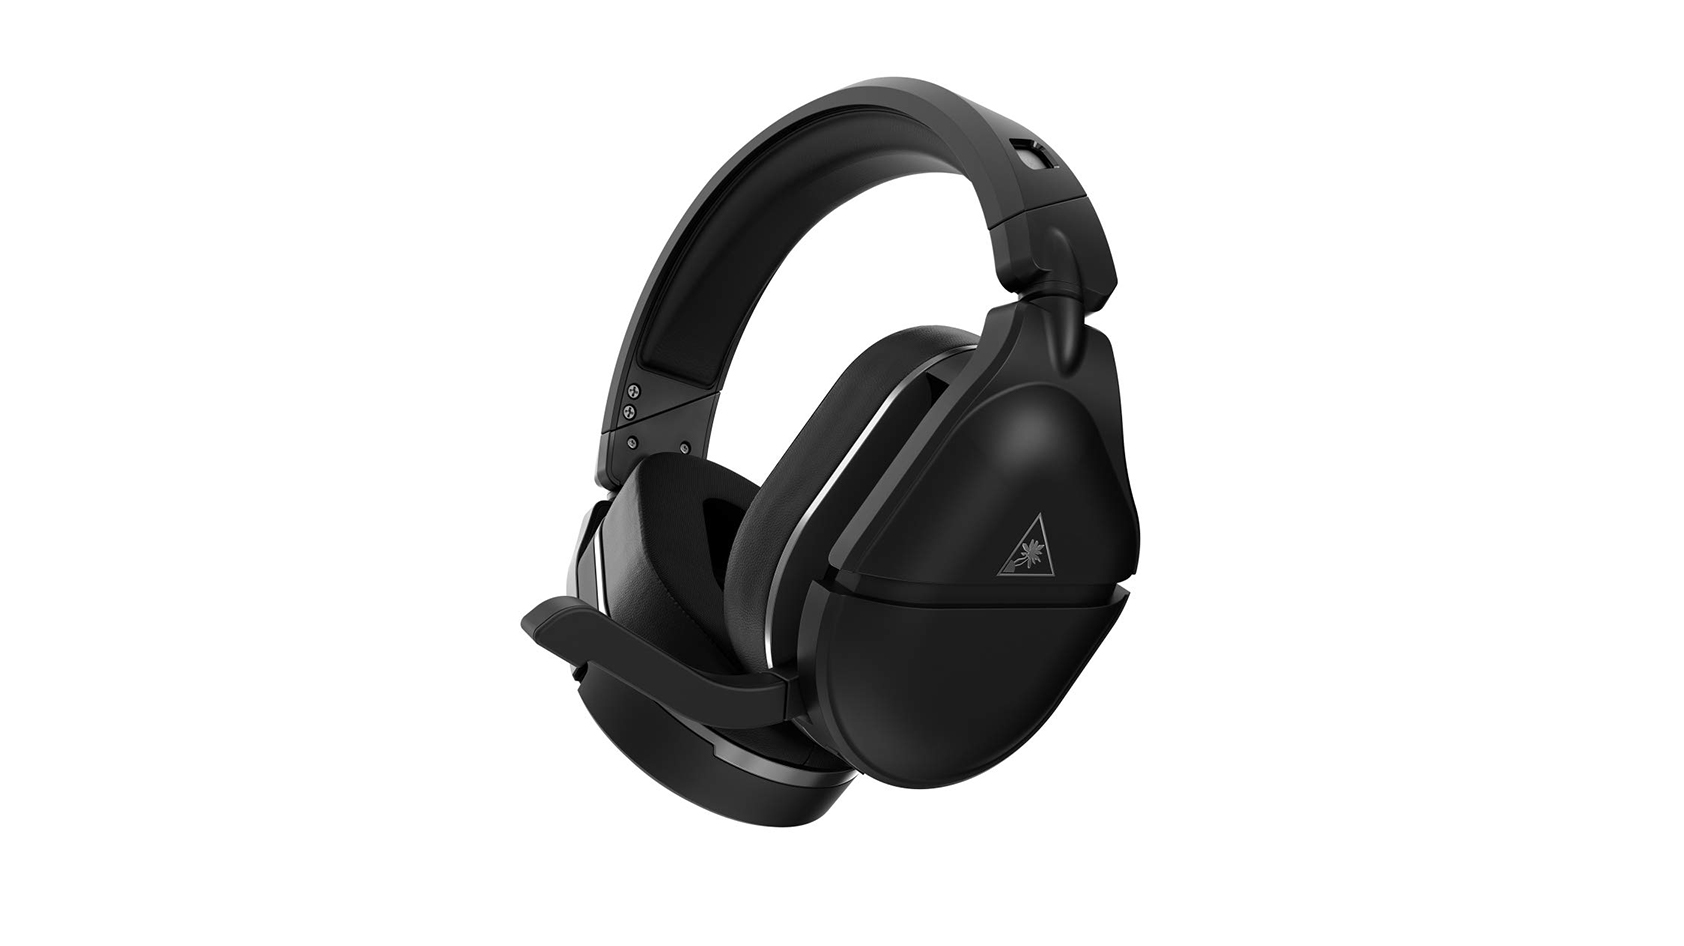 The Turtle Beach Stealth 700 Gen 2 gaming headset in black against a white background.